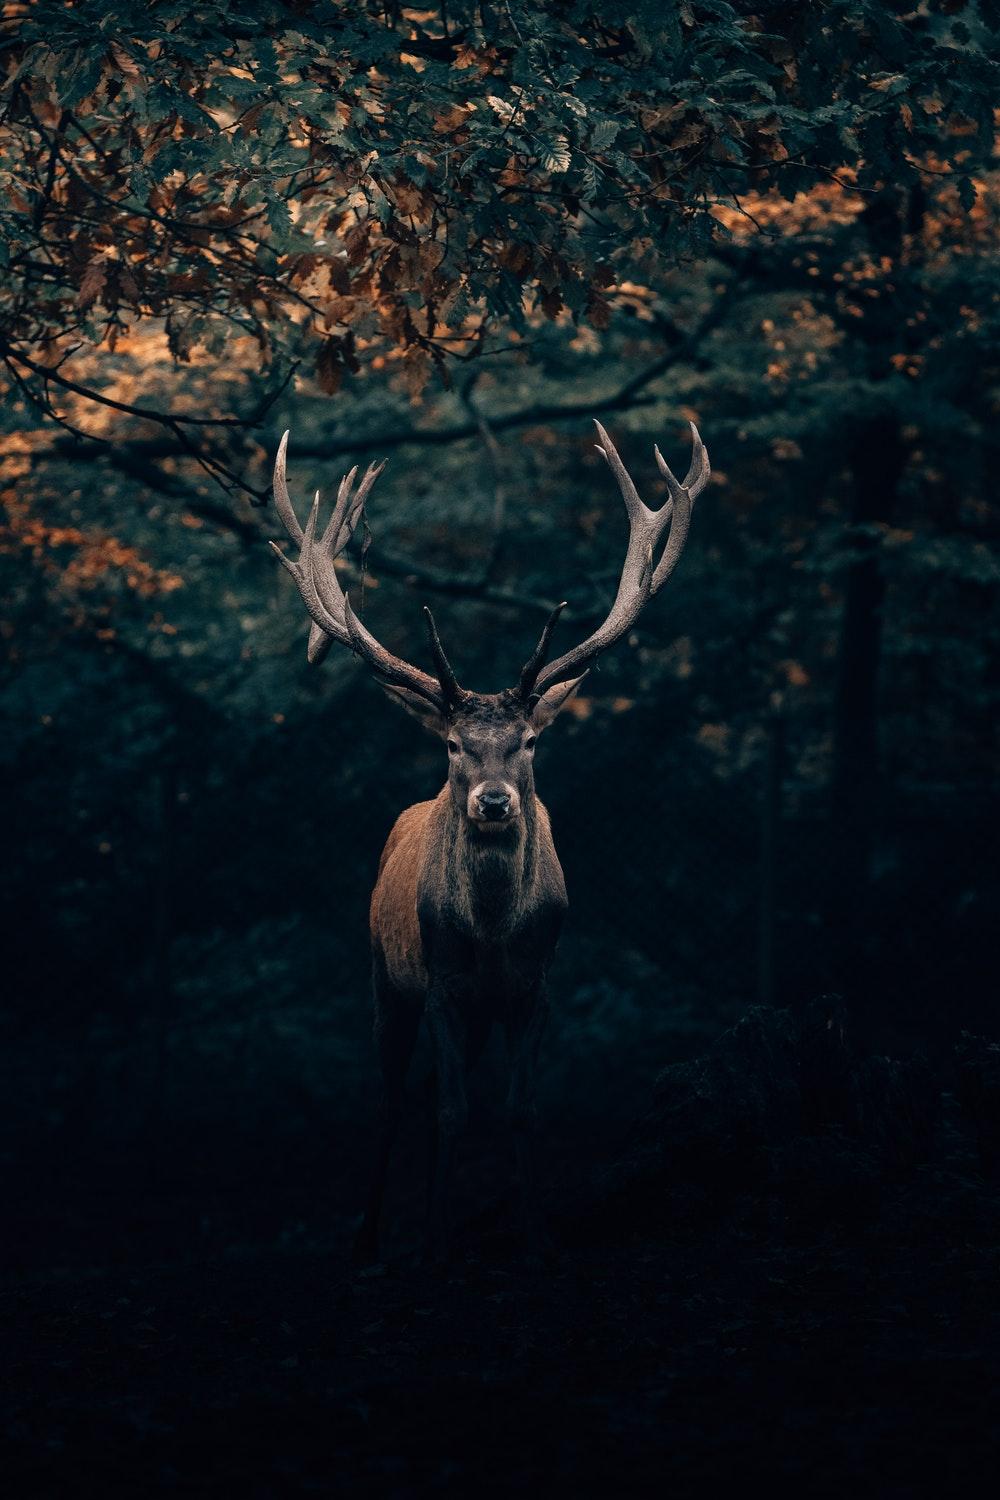 Deer Picture. Download Free Image